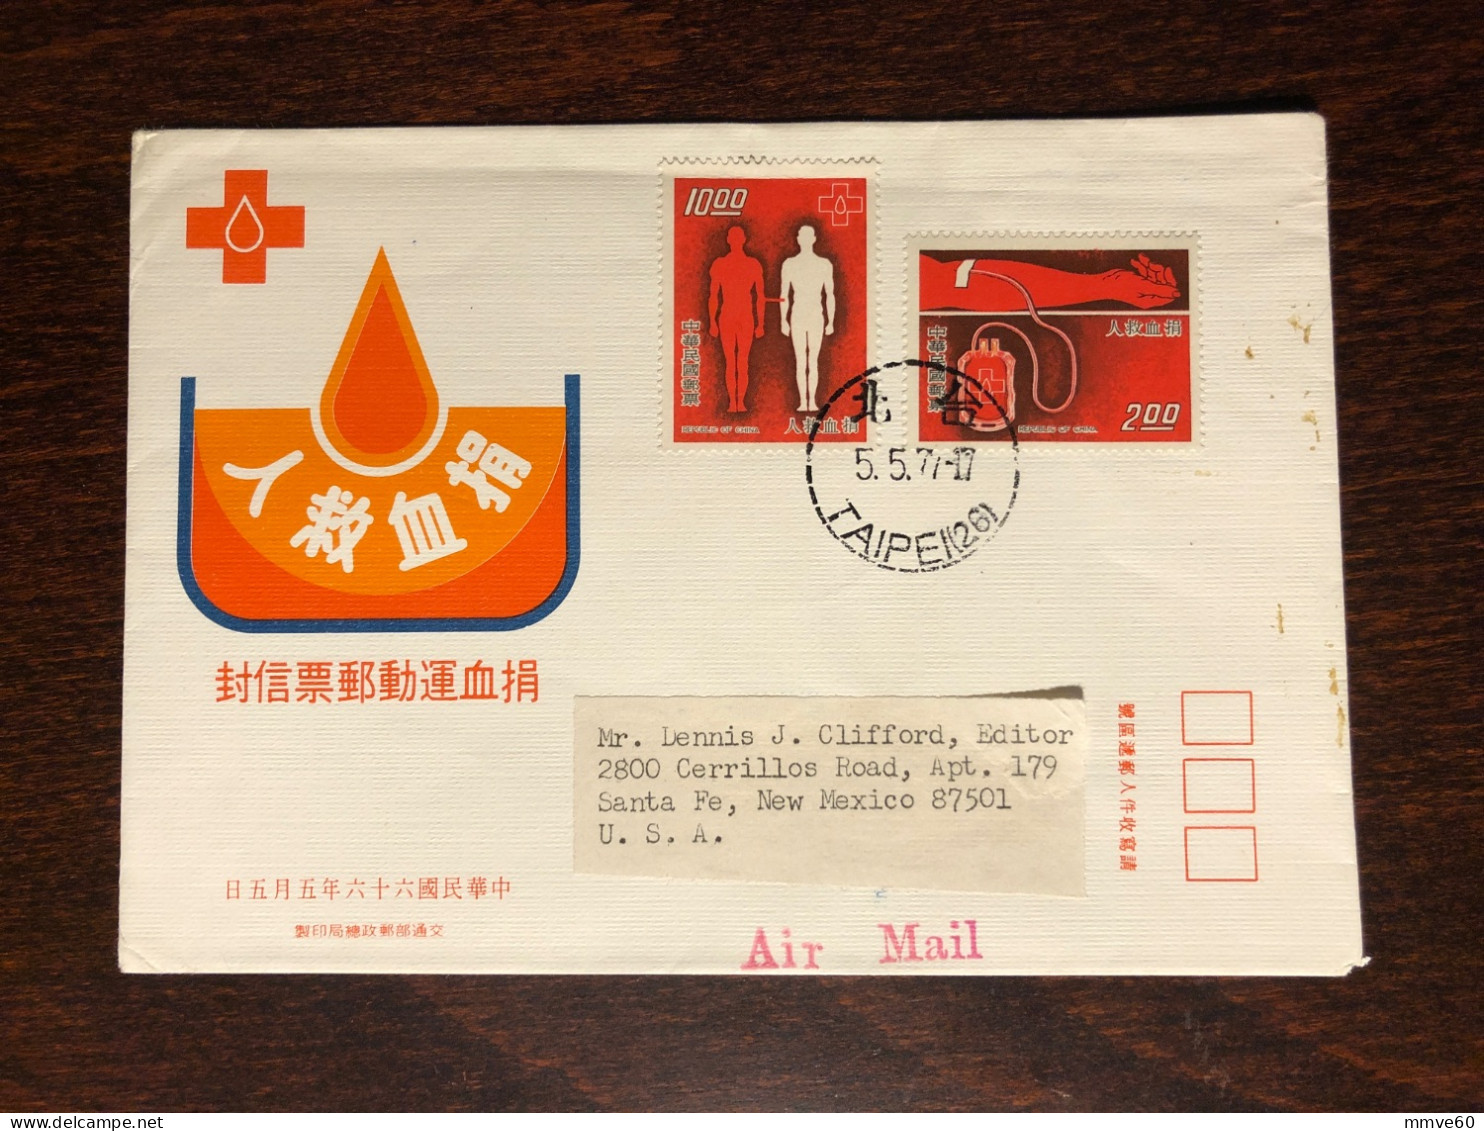 TAIWAN ROC FDC COVER 1977 YEAR BLOOD DONATION DONORS HEALTH MEDICINE STAMPS - FDC